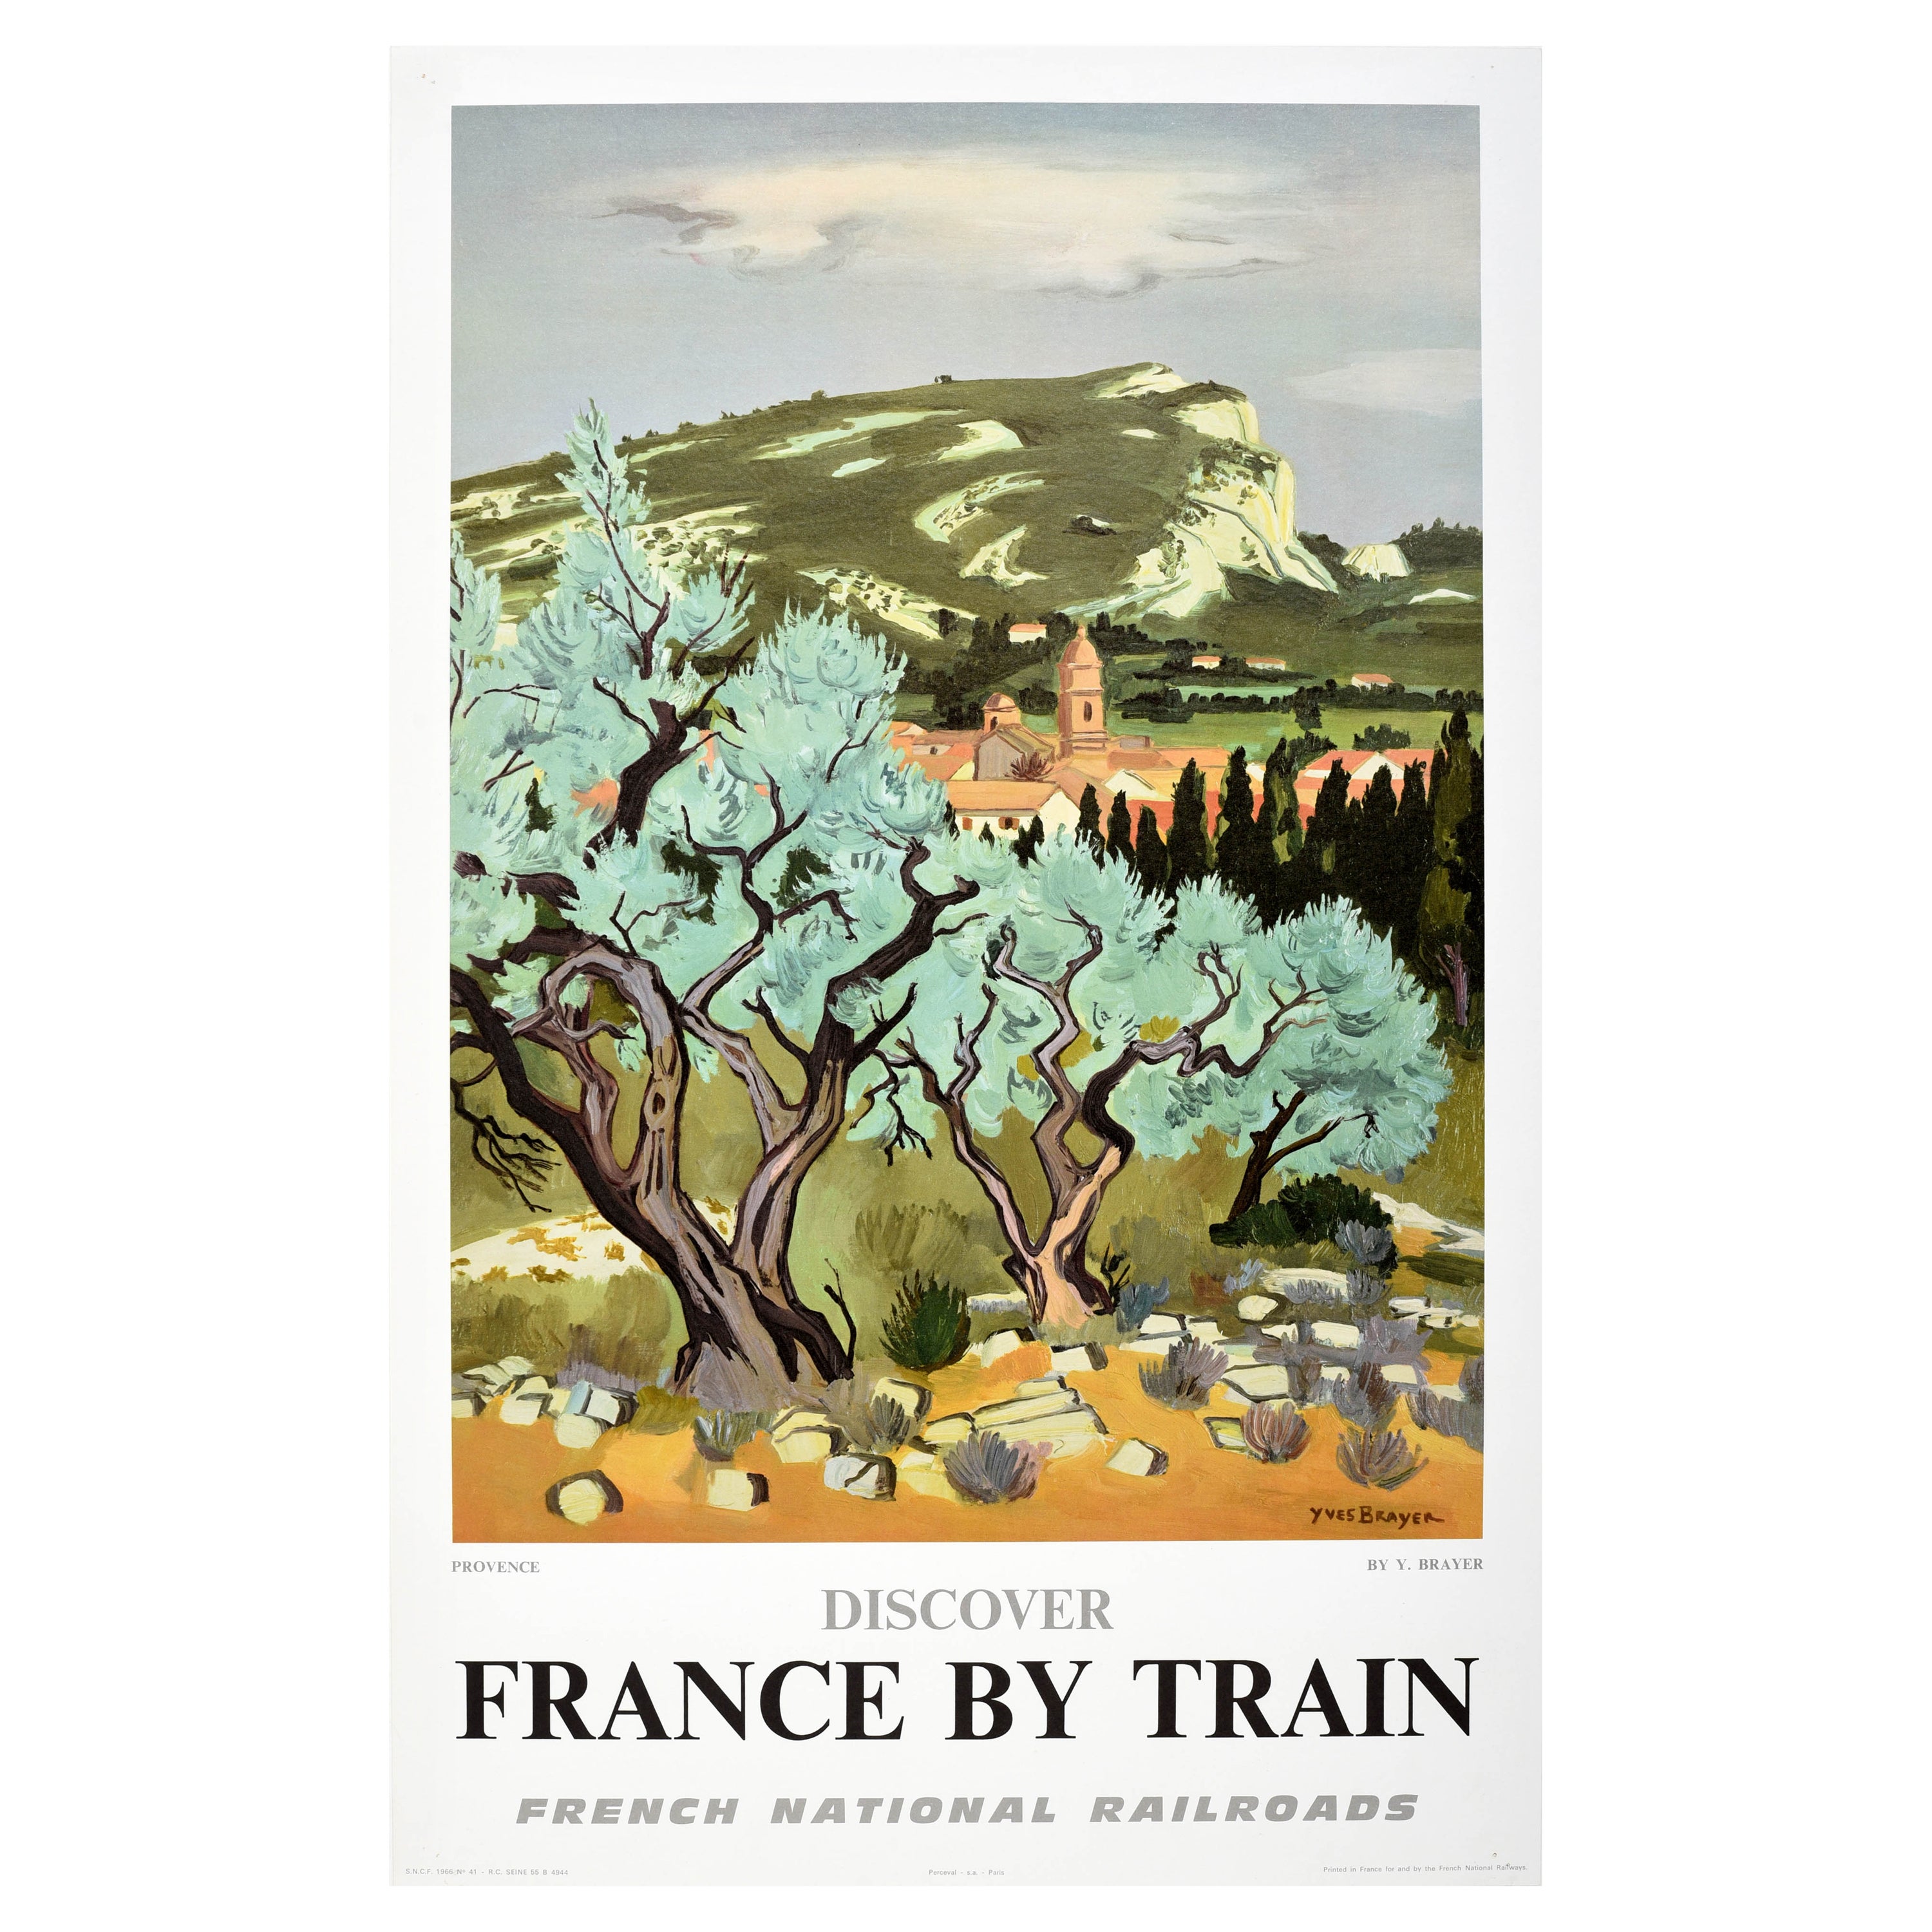 Original Vintage French Railway Travel Poster Provence Discover France By Train